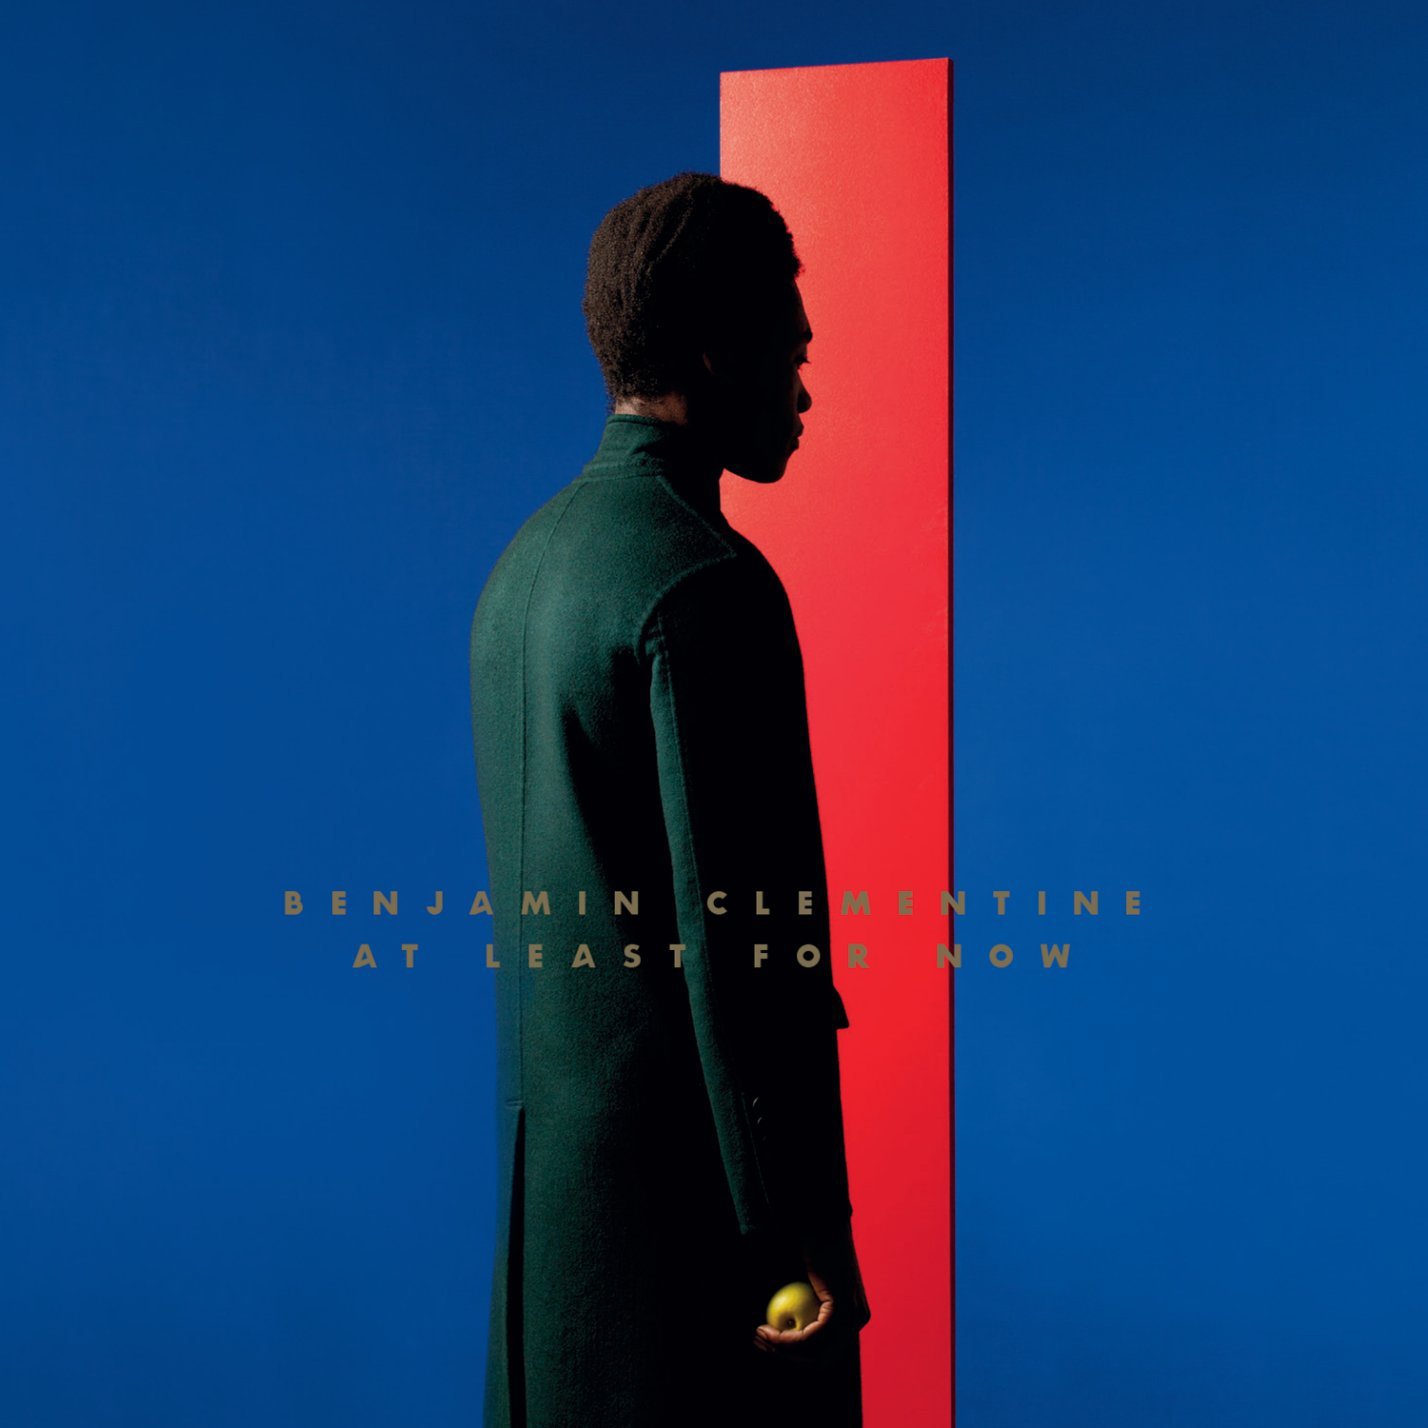 Benjamin Clementine - At Least For Now (2015) [HDTracks FLAC 24bit/44,1kHz]